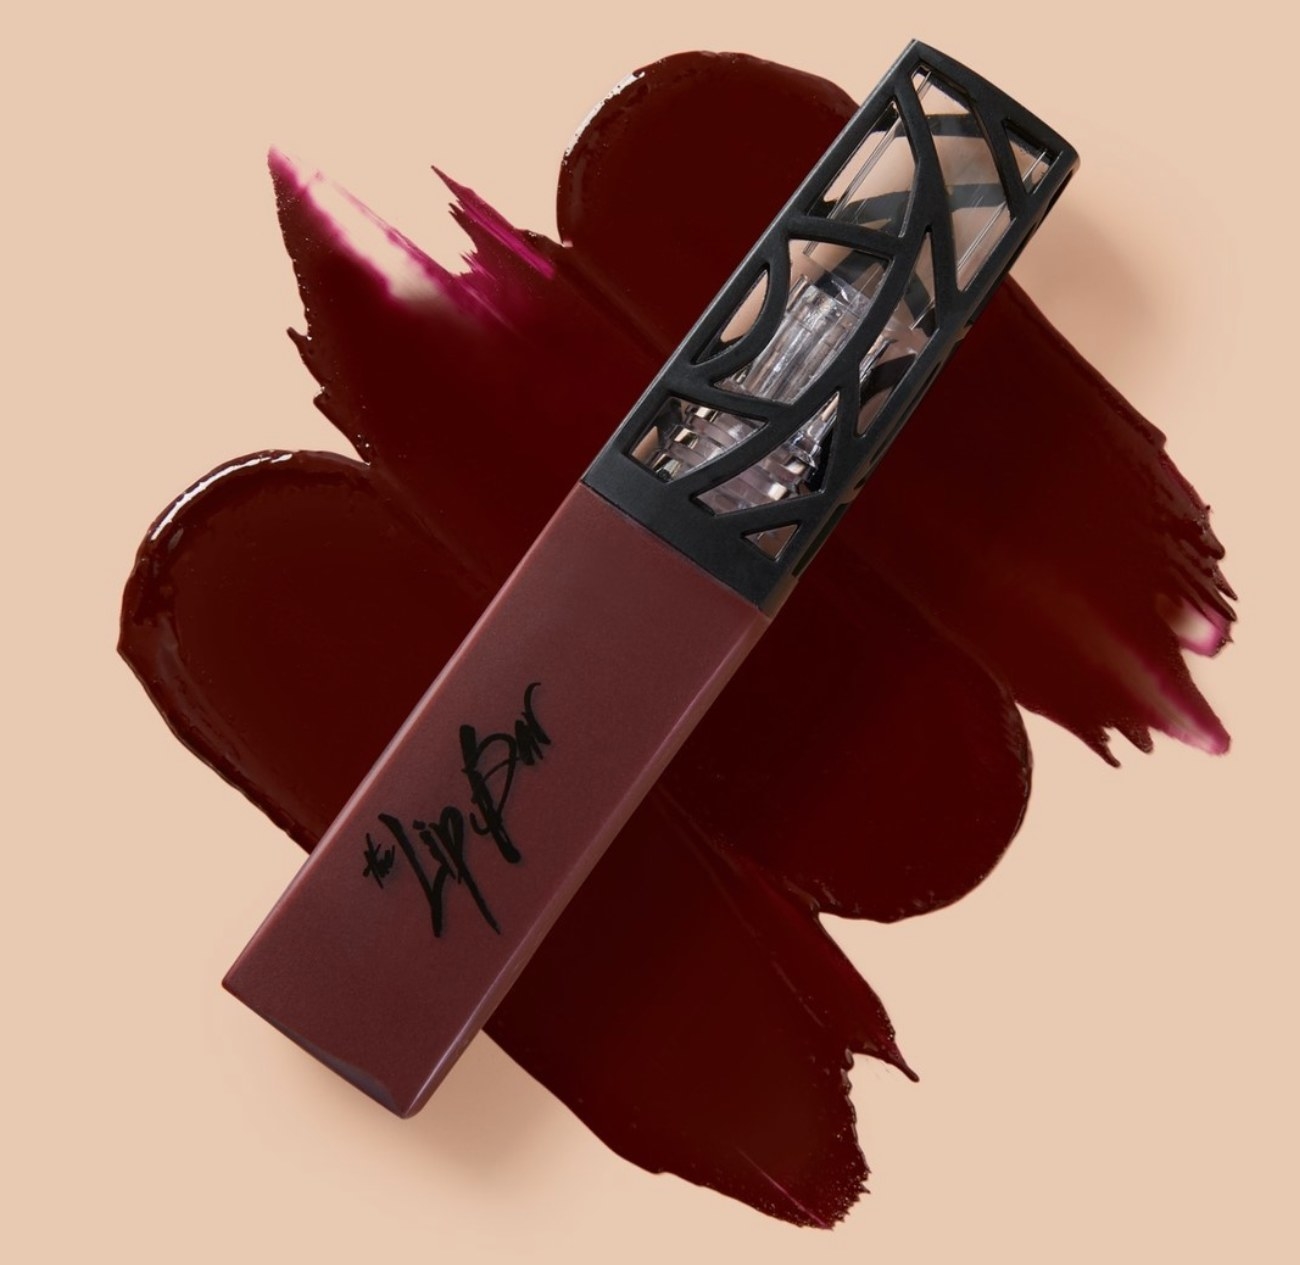 The lip stain in burgundy 